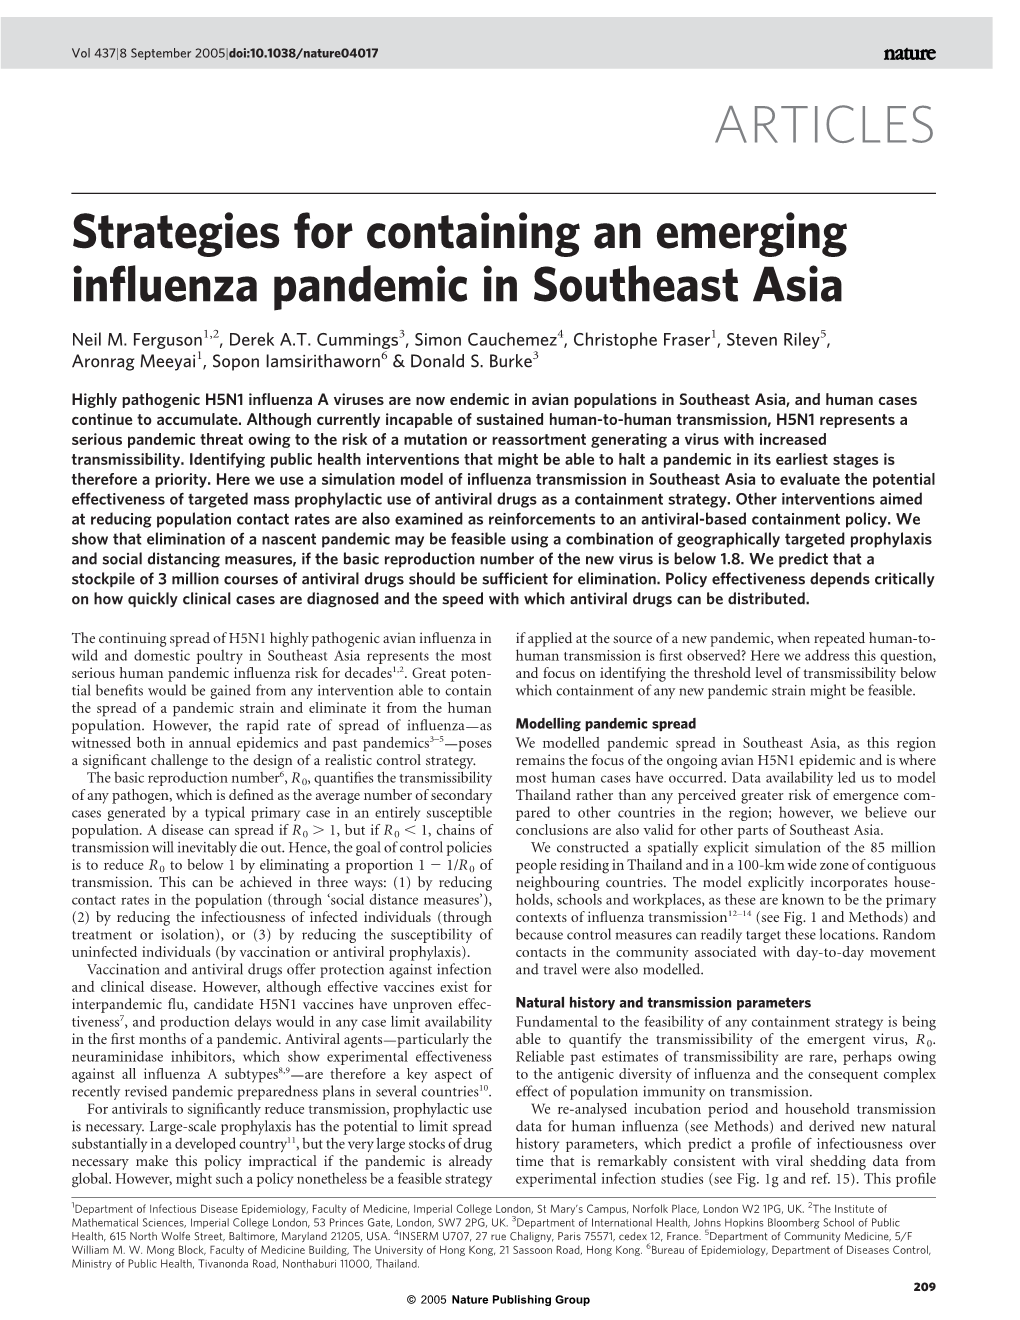 Strategies for Containing an Emerging Influenza Pandemic in Southeast Asia